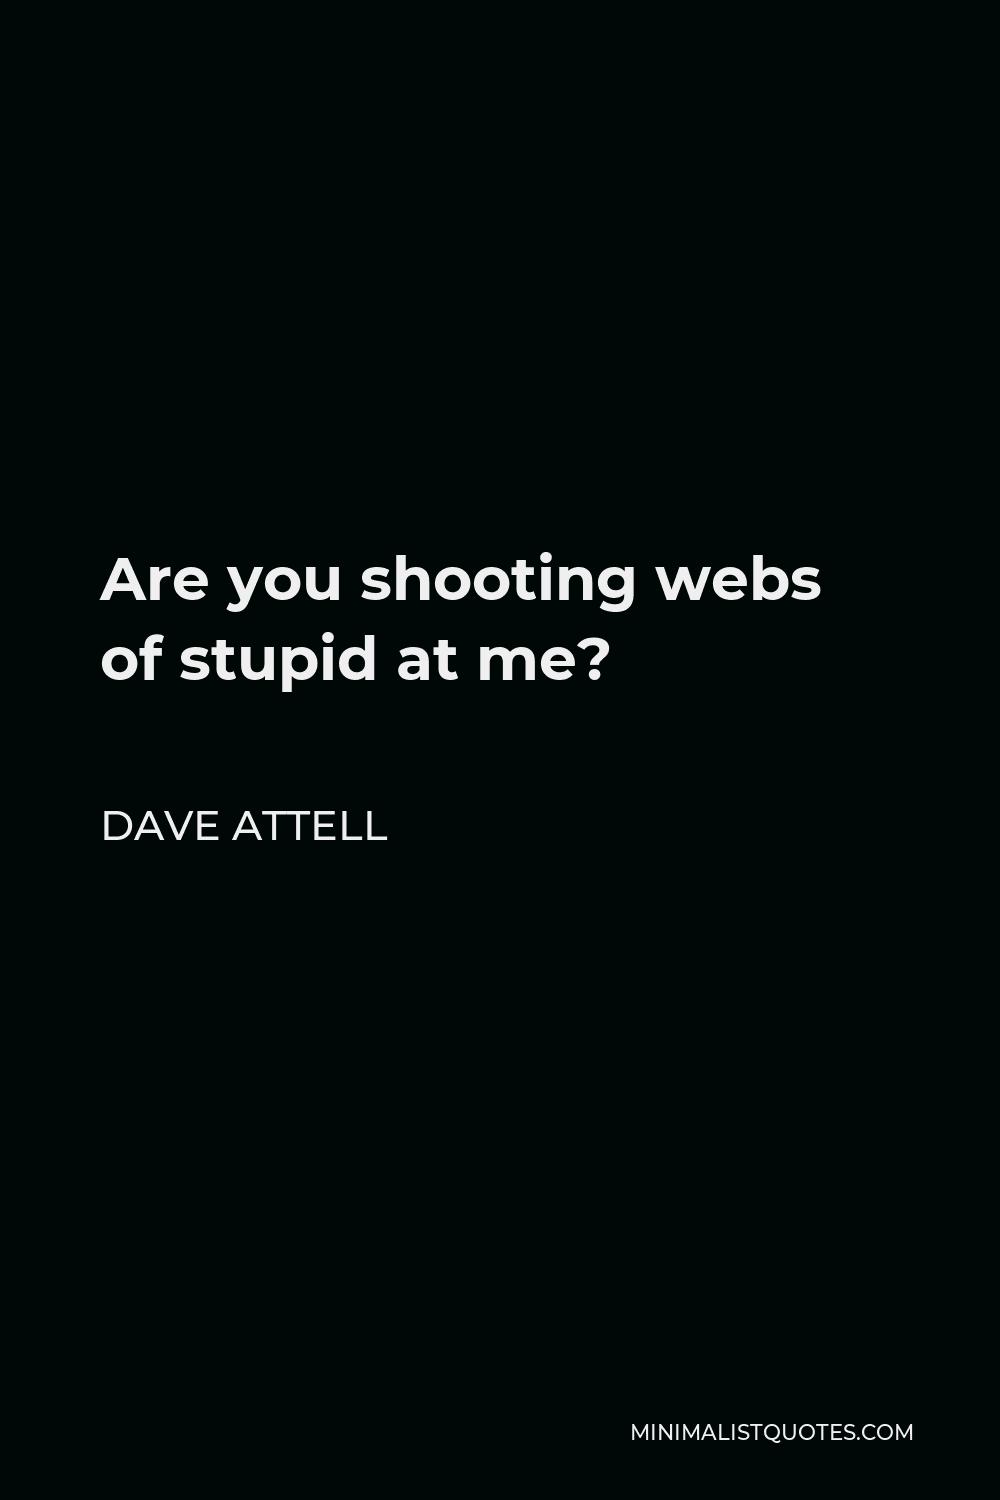 Dave Attell Quote - Are you shooting webs of stupid at me?